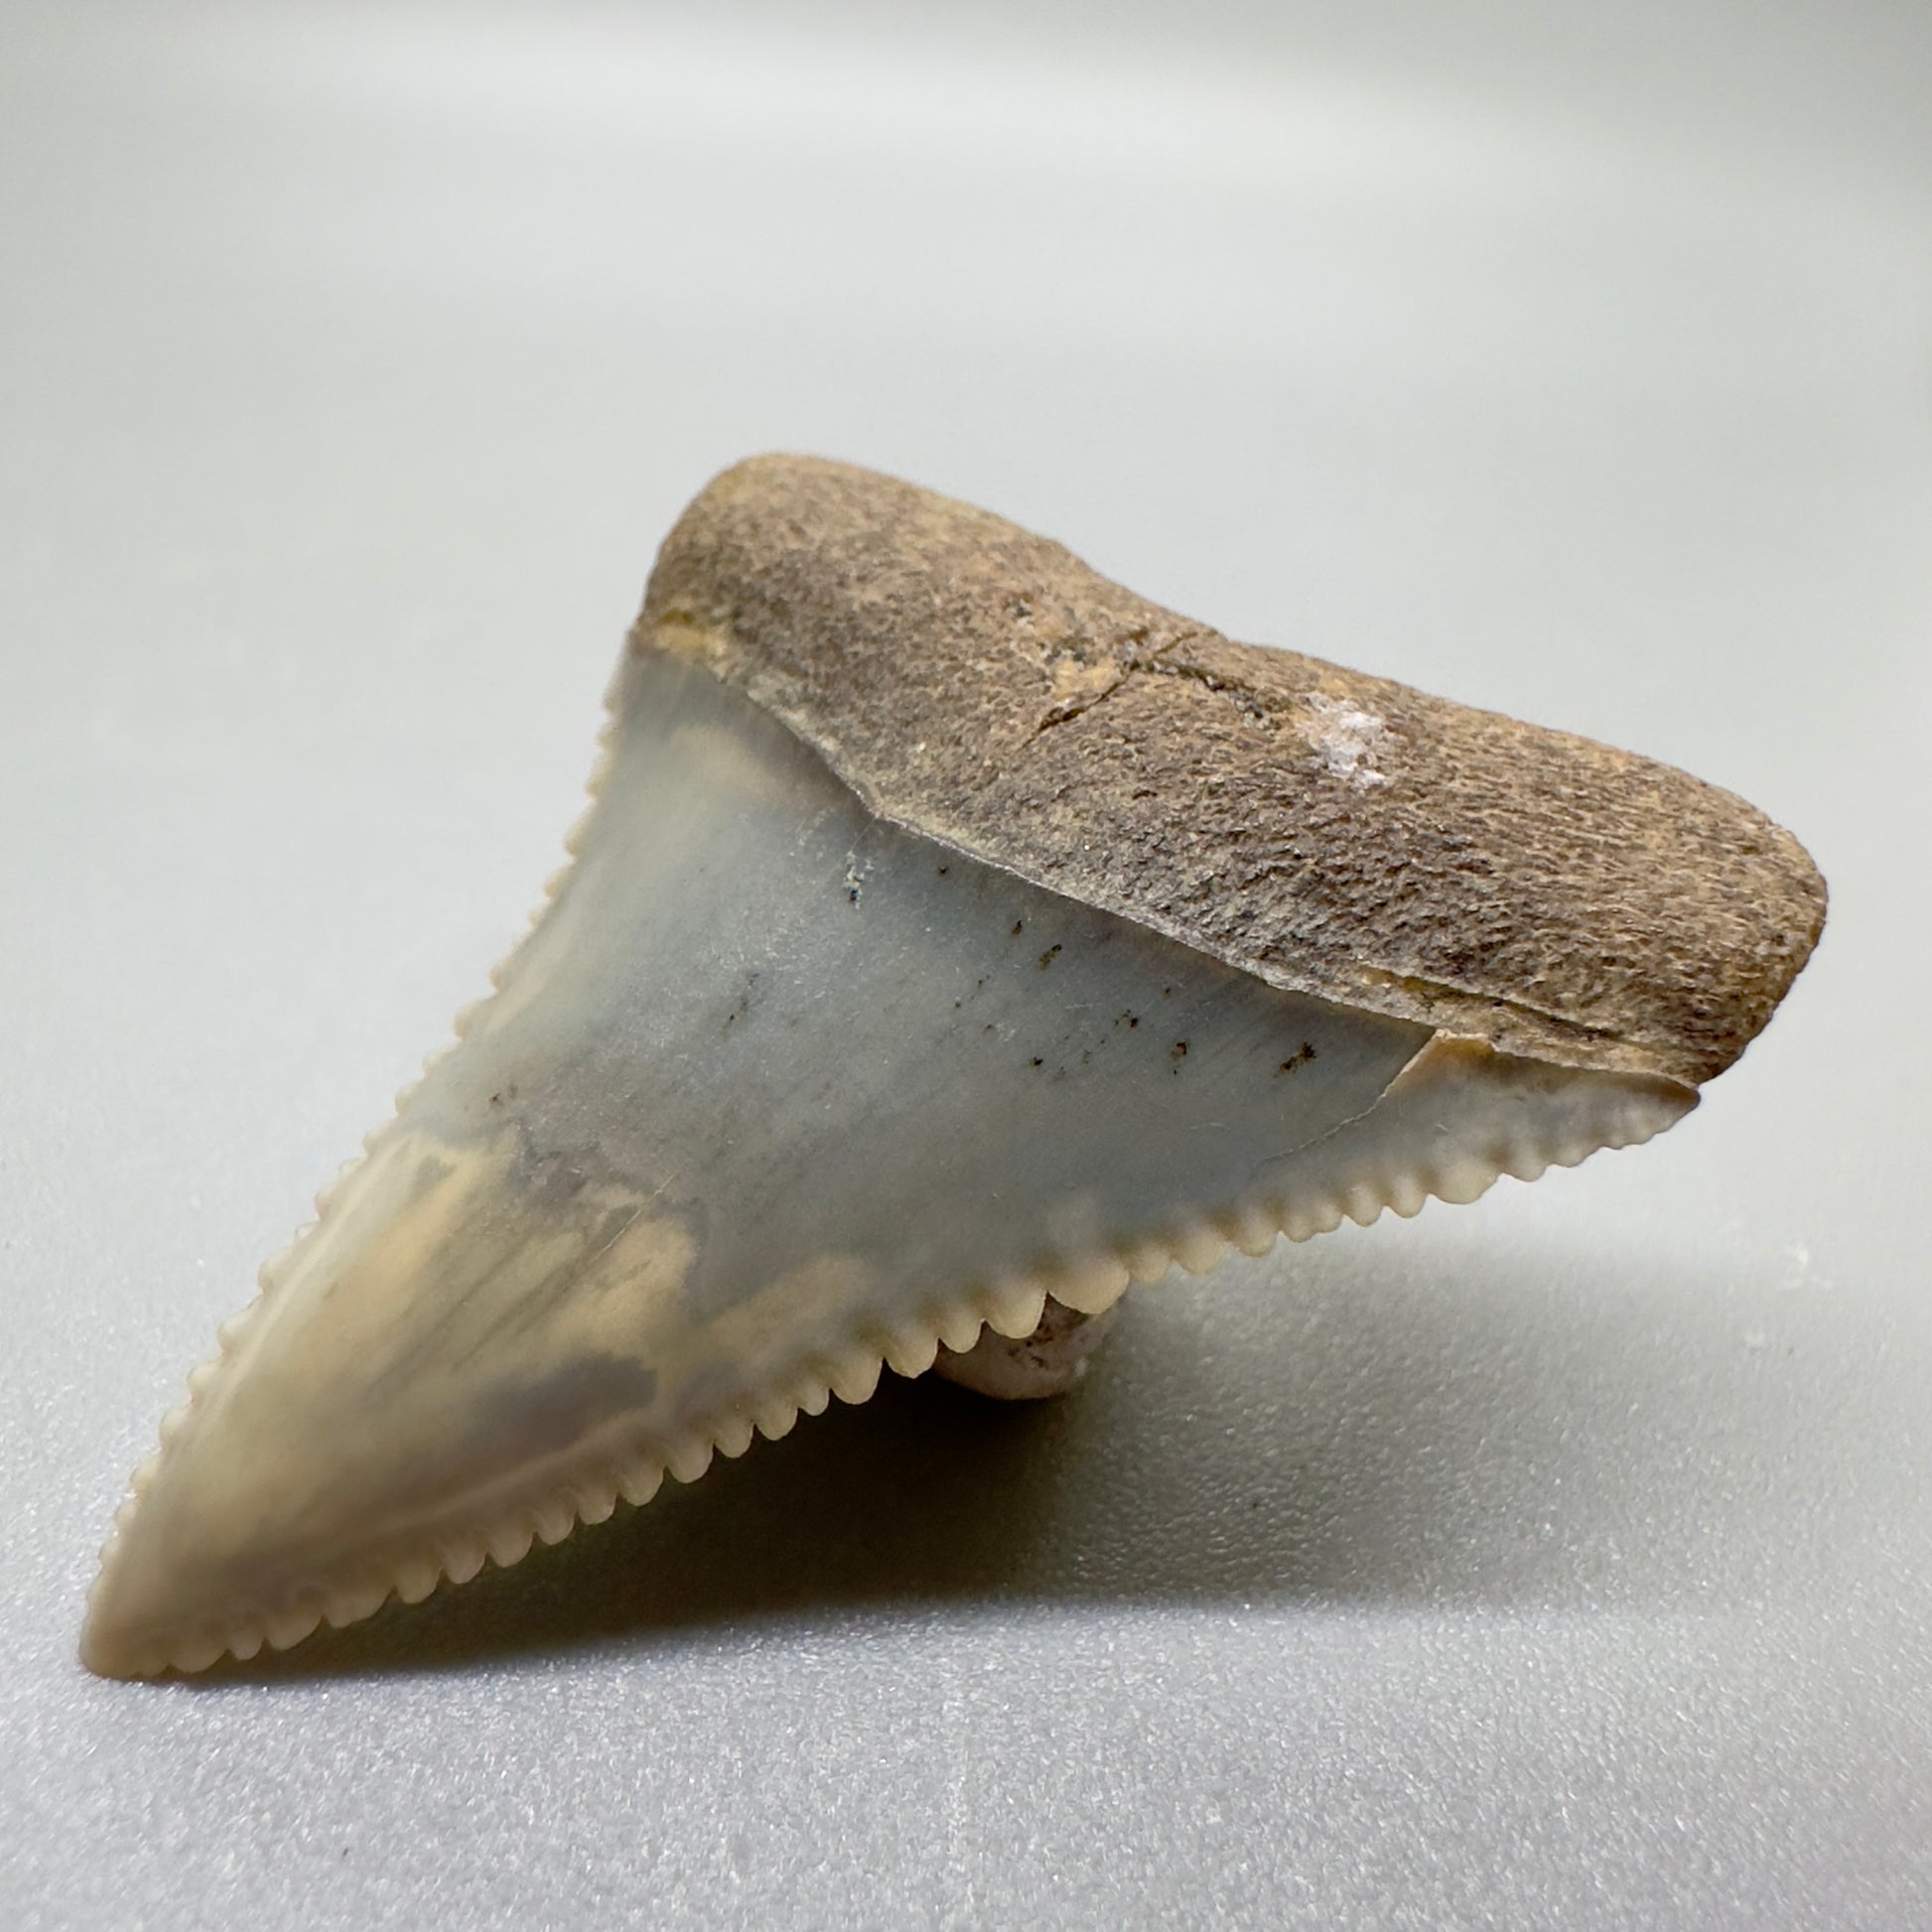 Serrated 1.51" Colorful Fossil Great White Tooth from Sacaco, Peru - Unique Collectible GW1052 - Front right